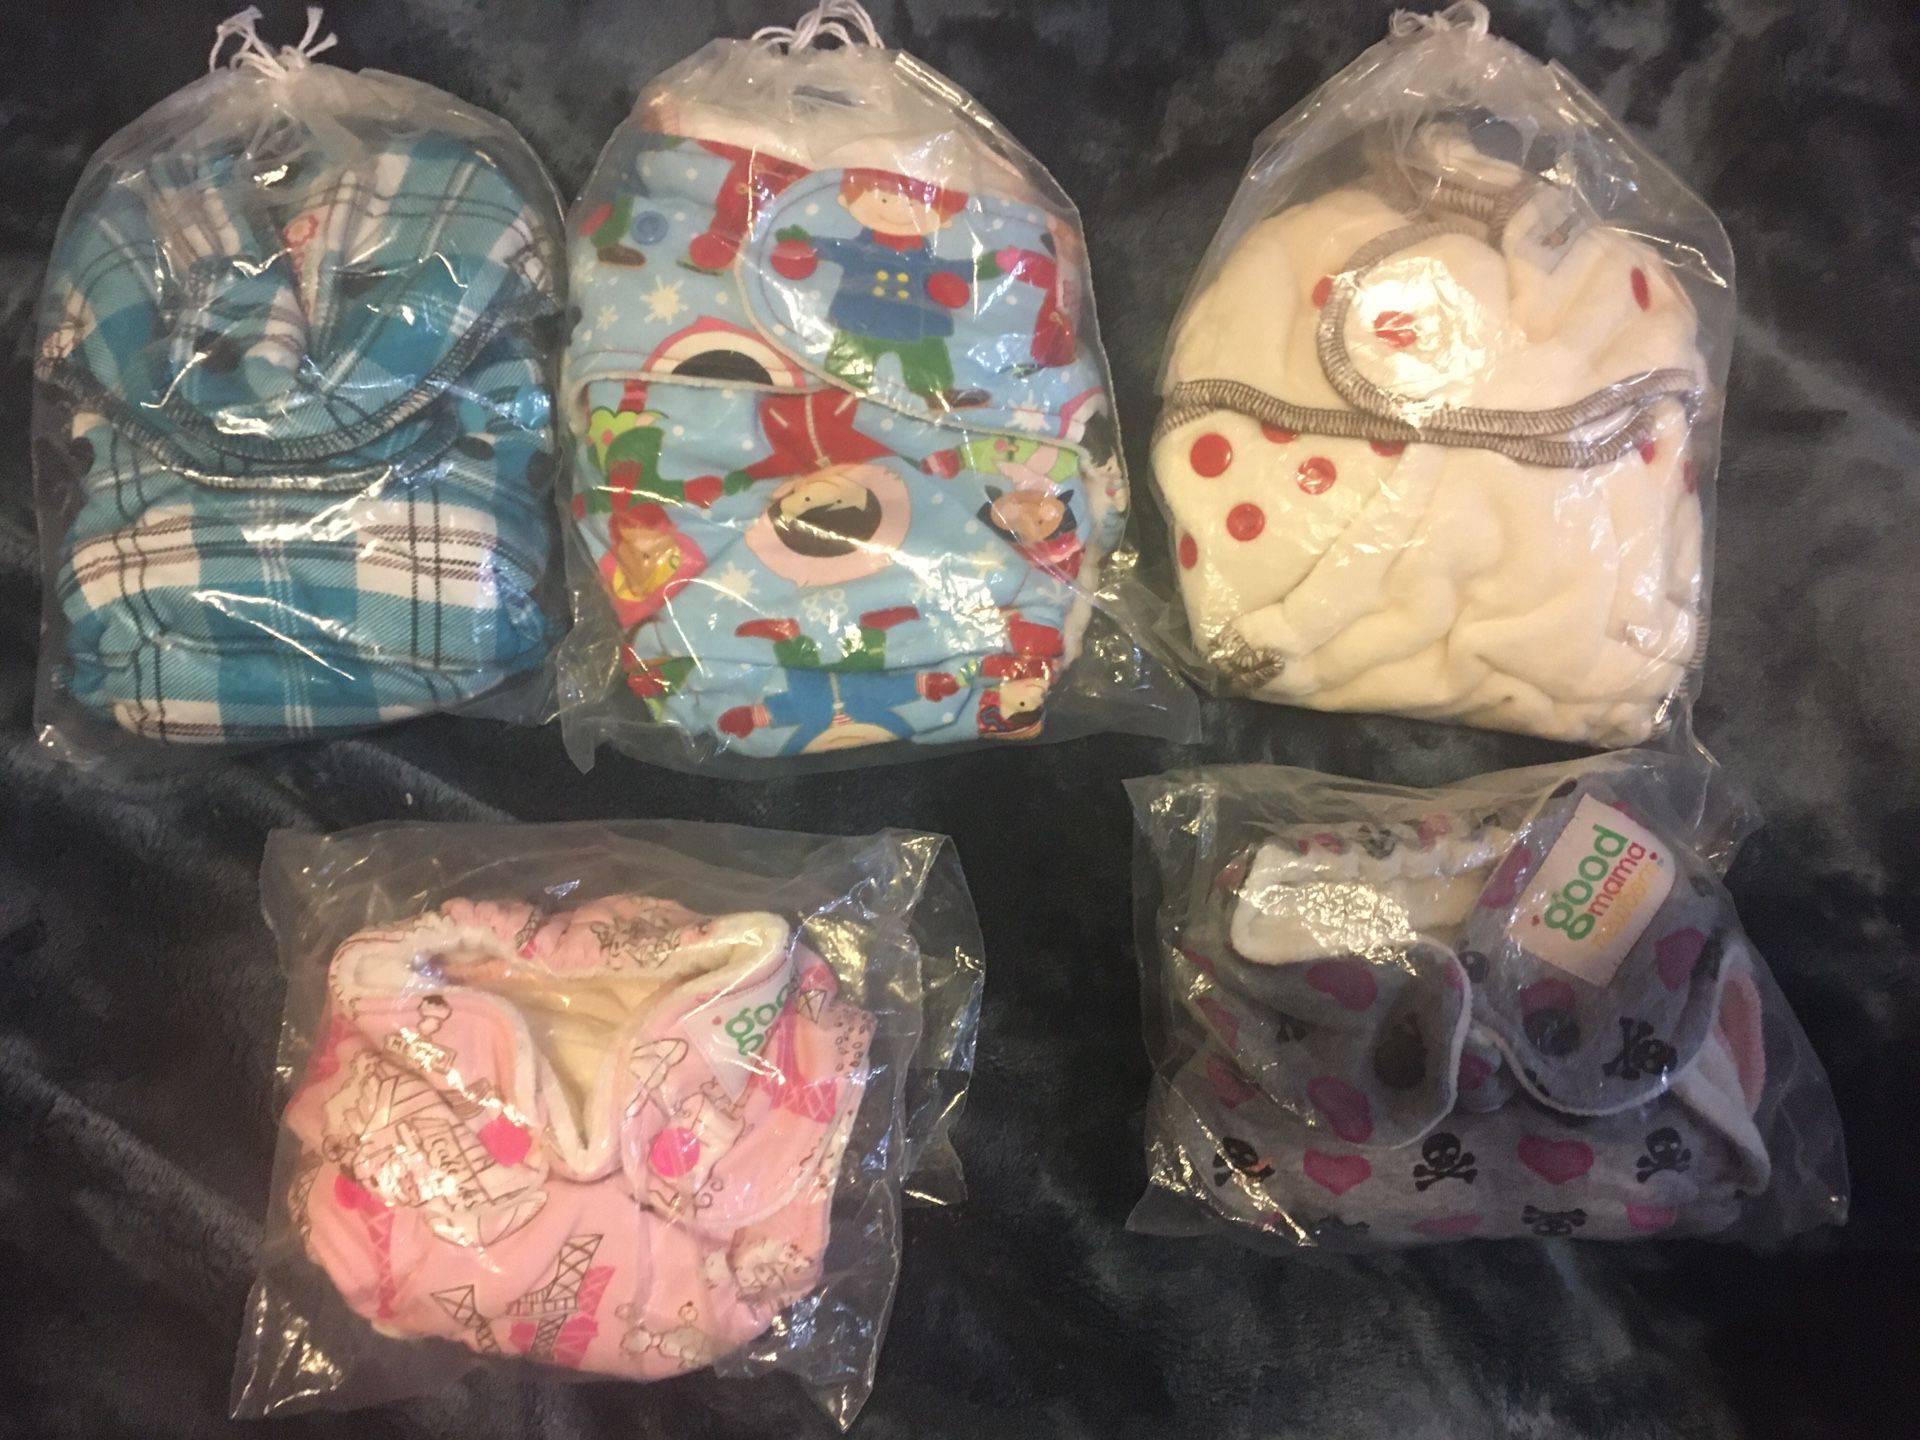 Goodmama new in package diapers